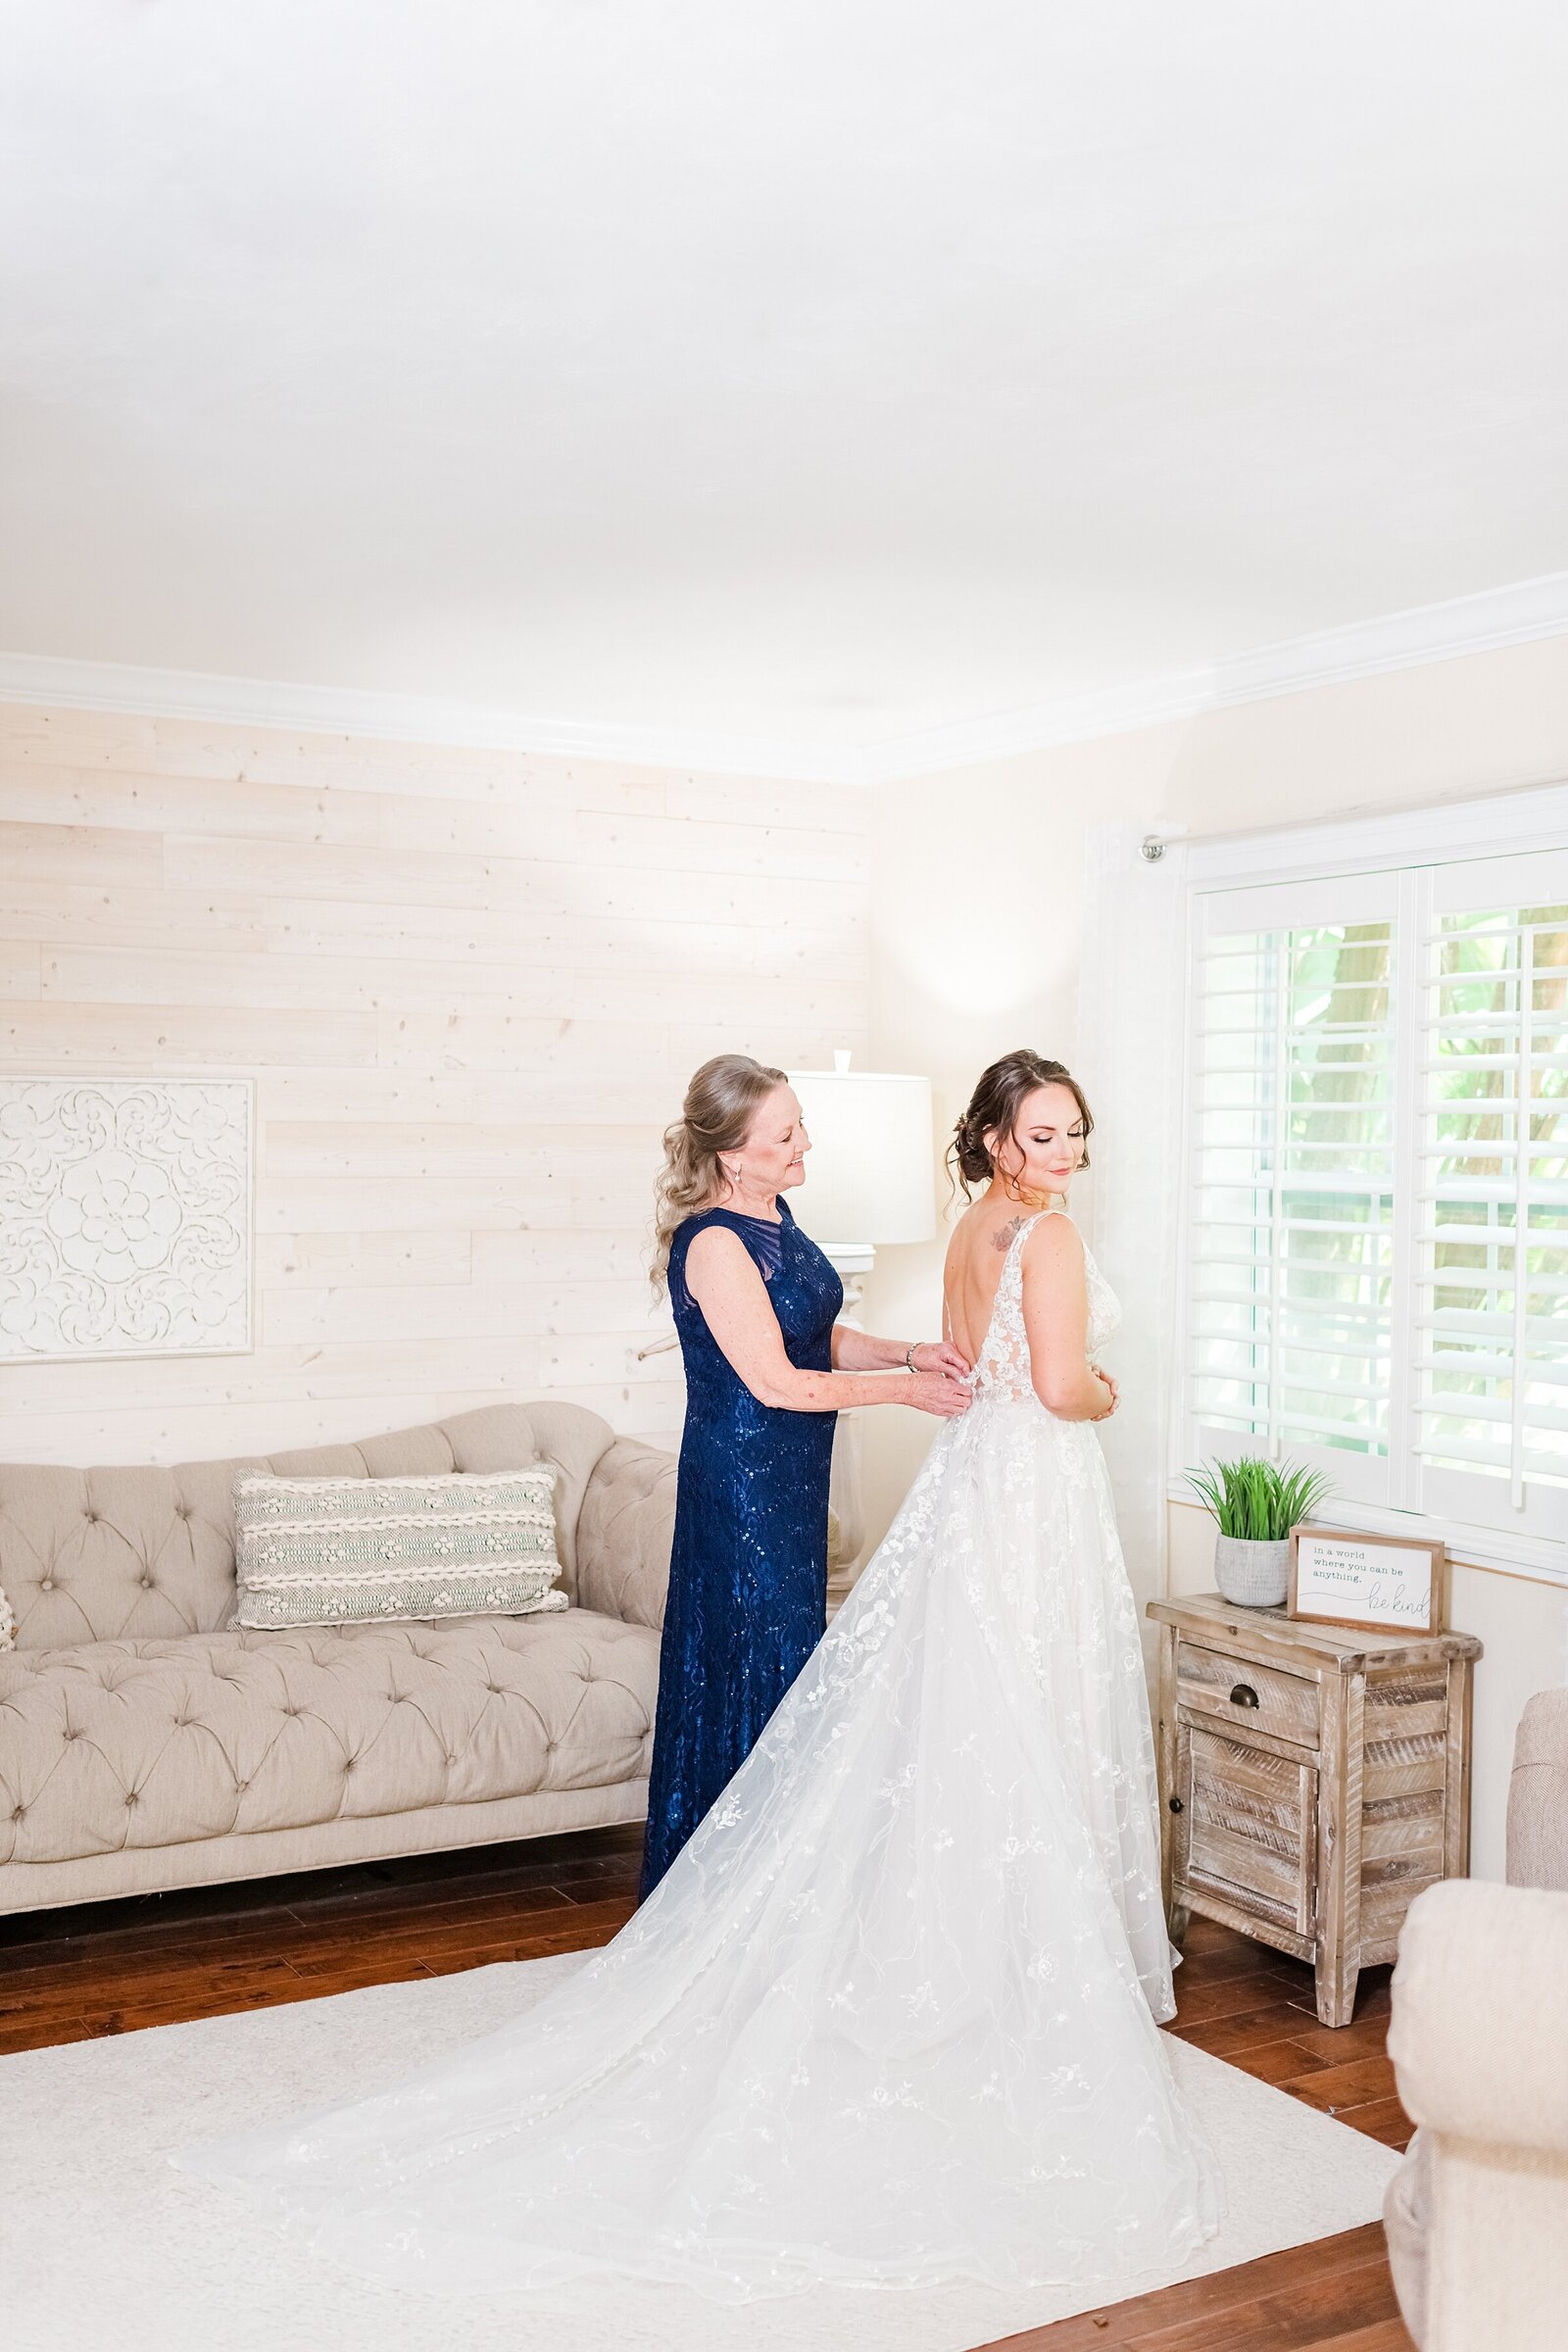 Bride in wedding gown | The Delamater House Wedding | Chynna Pacheco Photography-144